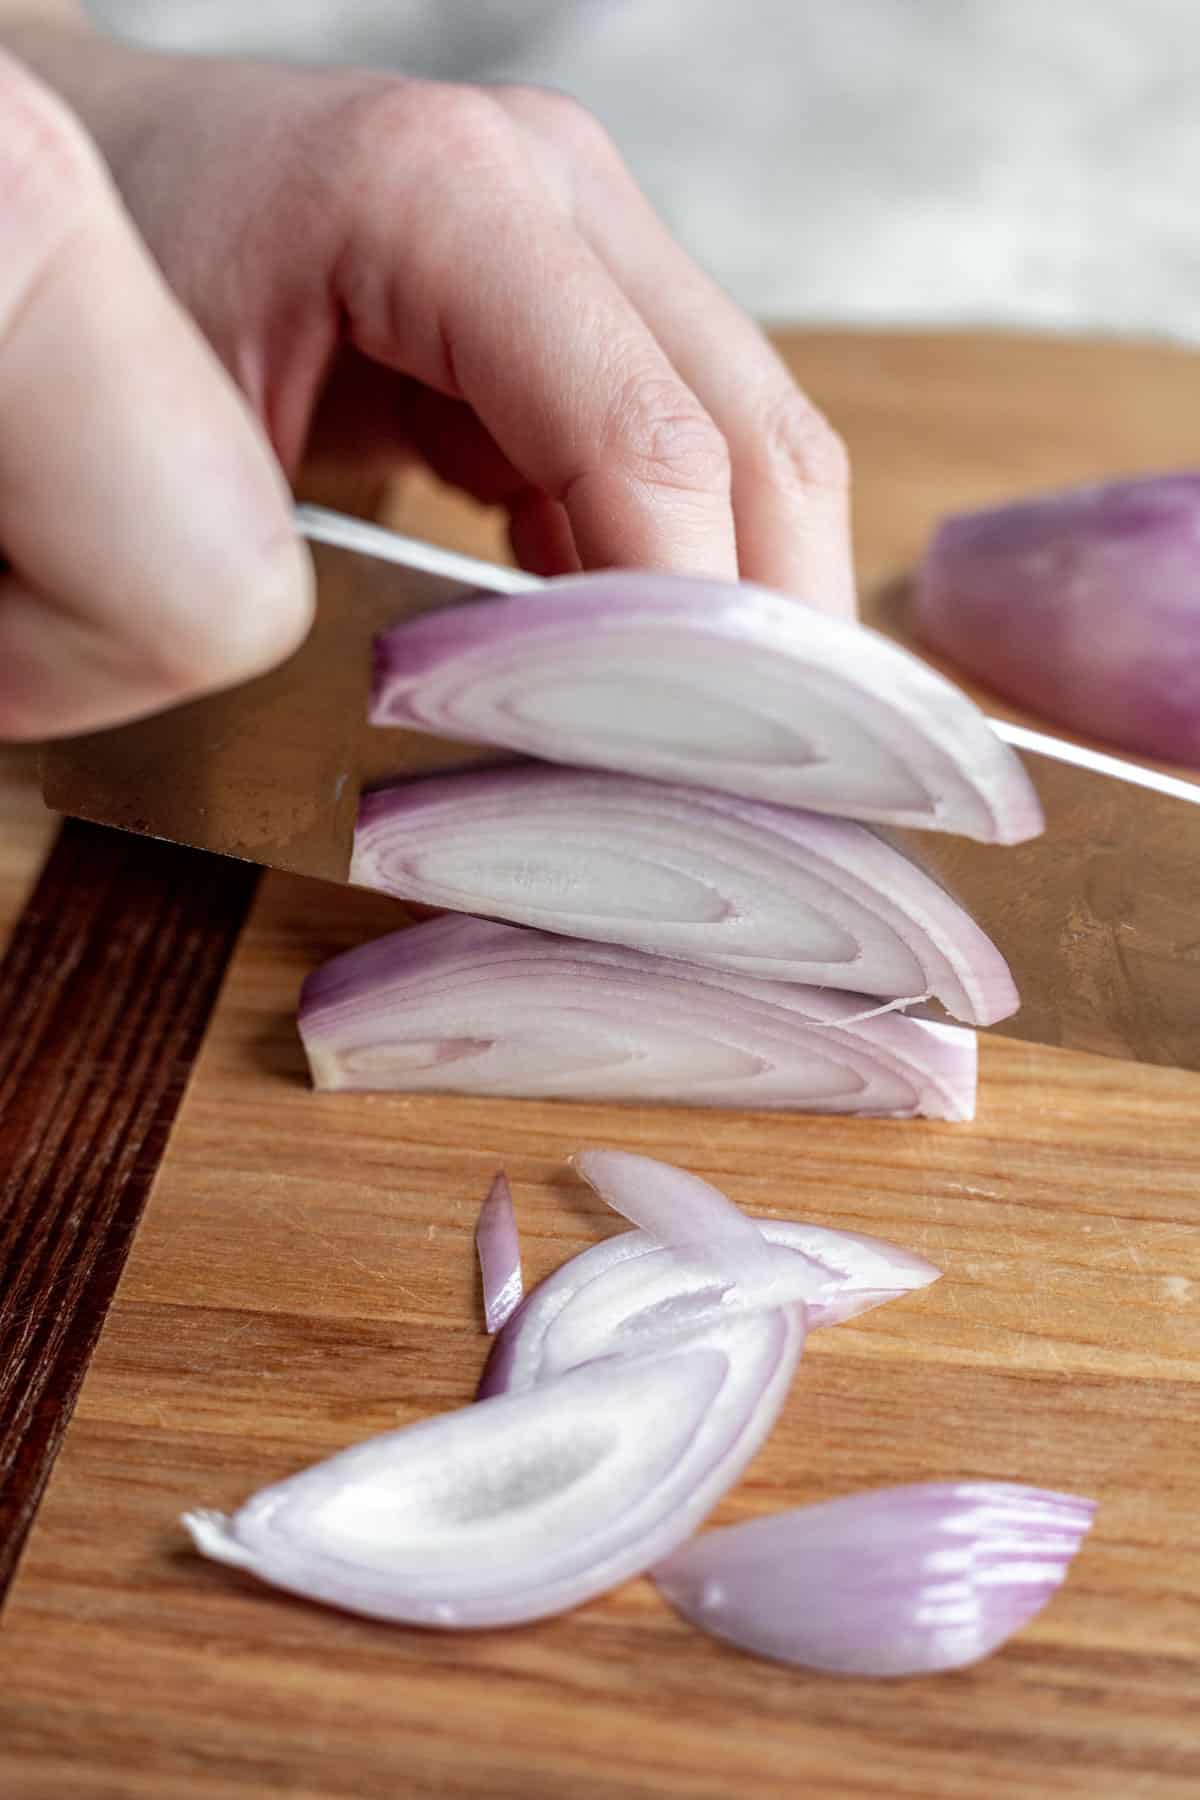 A chef's knife making multiple julienne slices into a shallot.